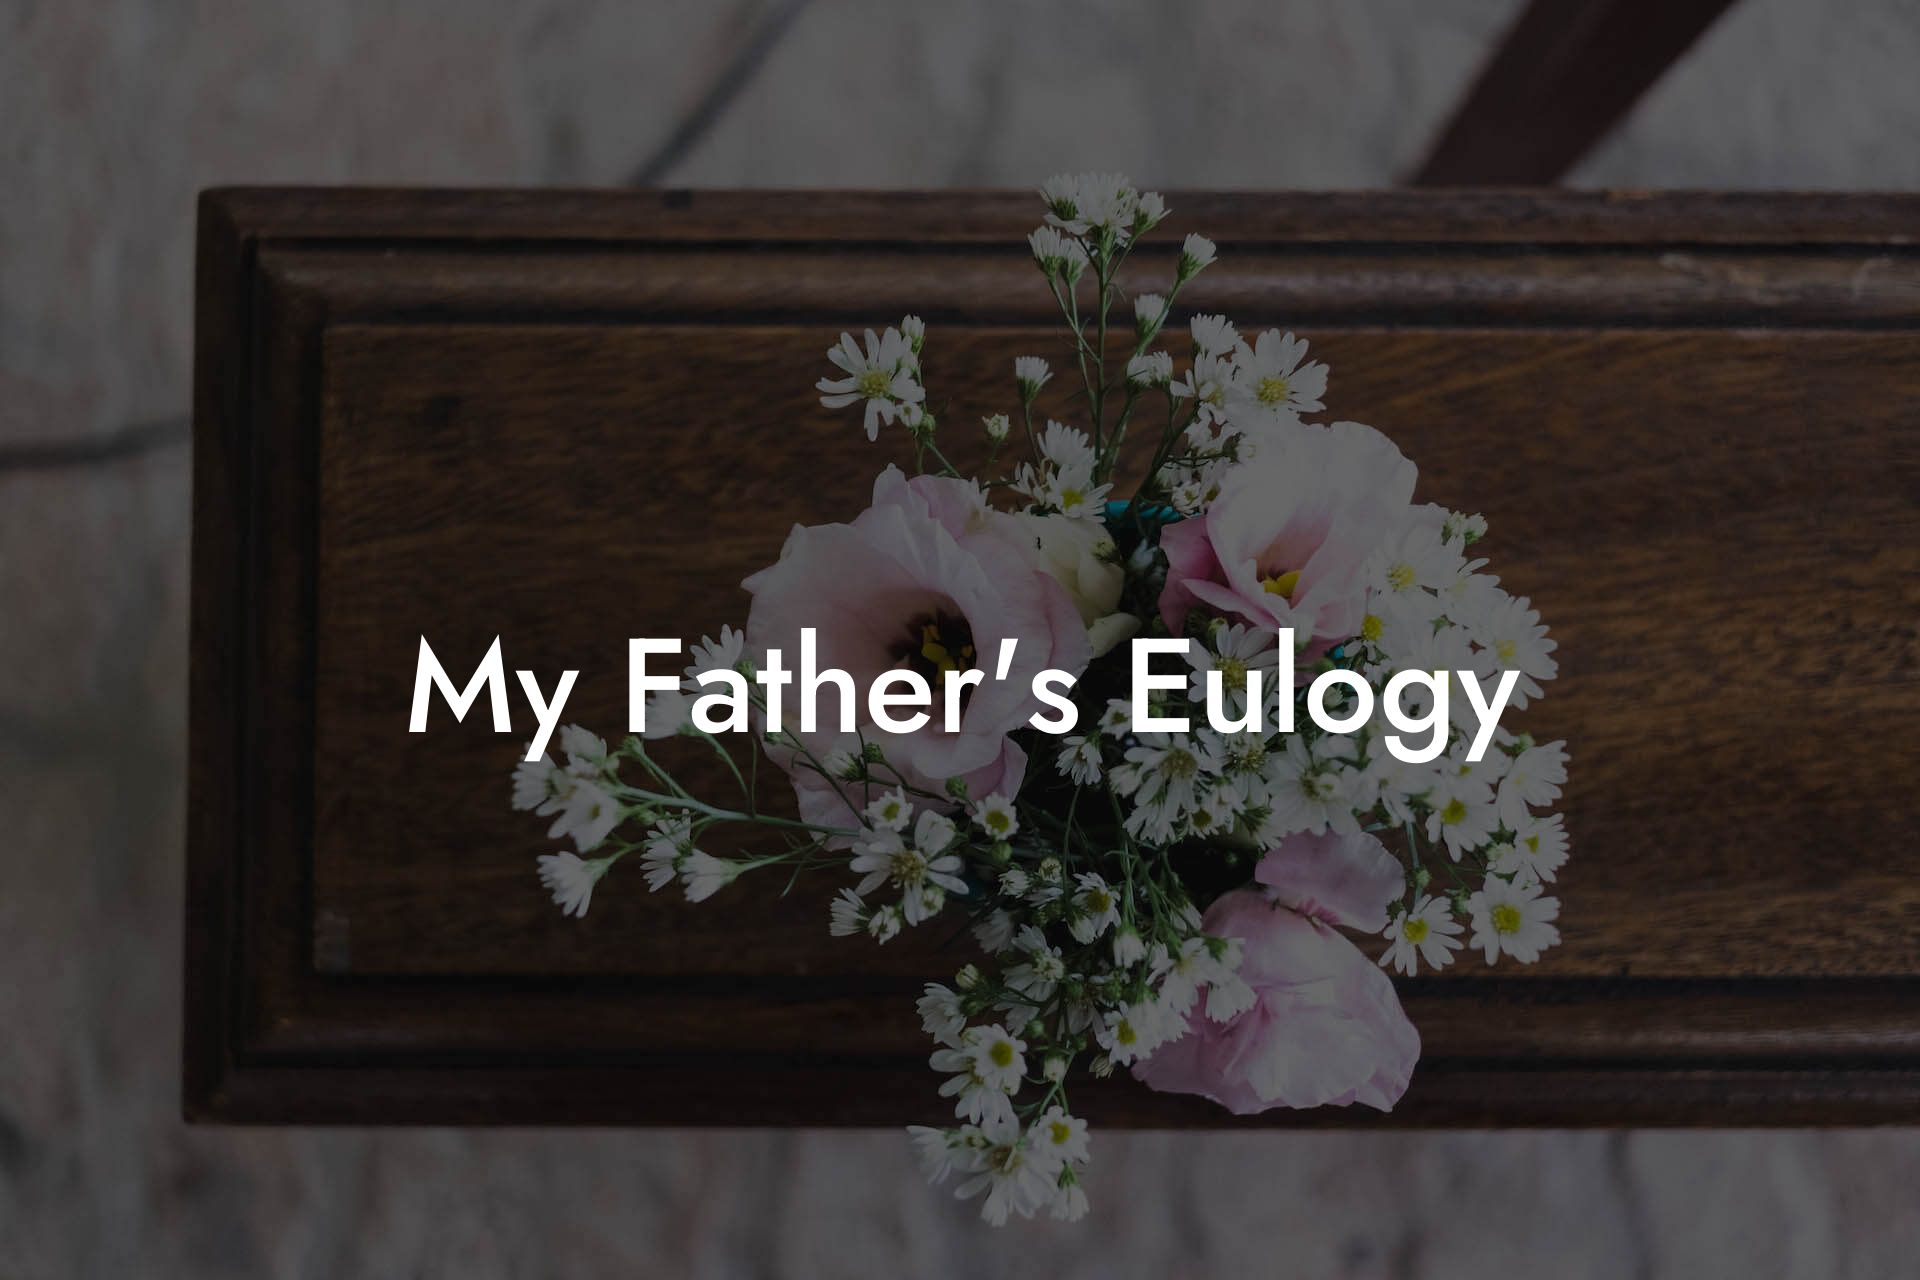 My Father's Eulogy